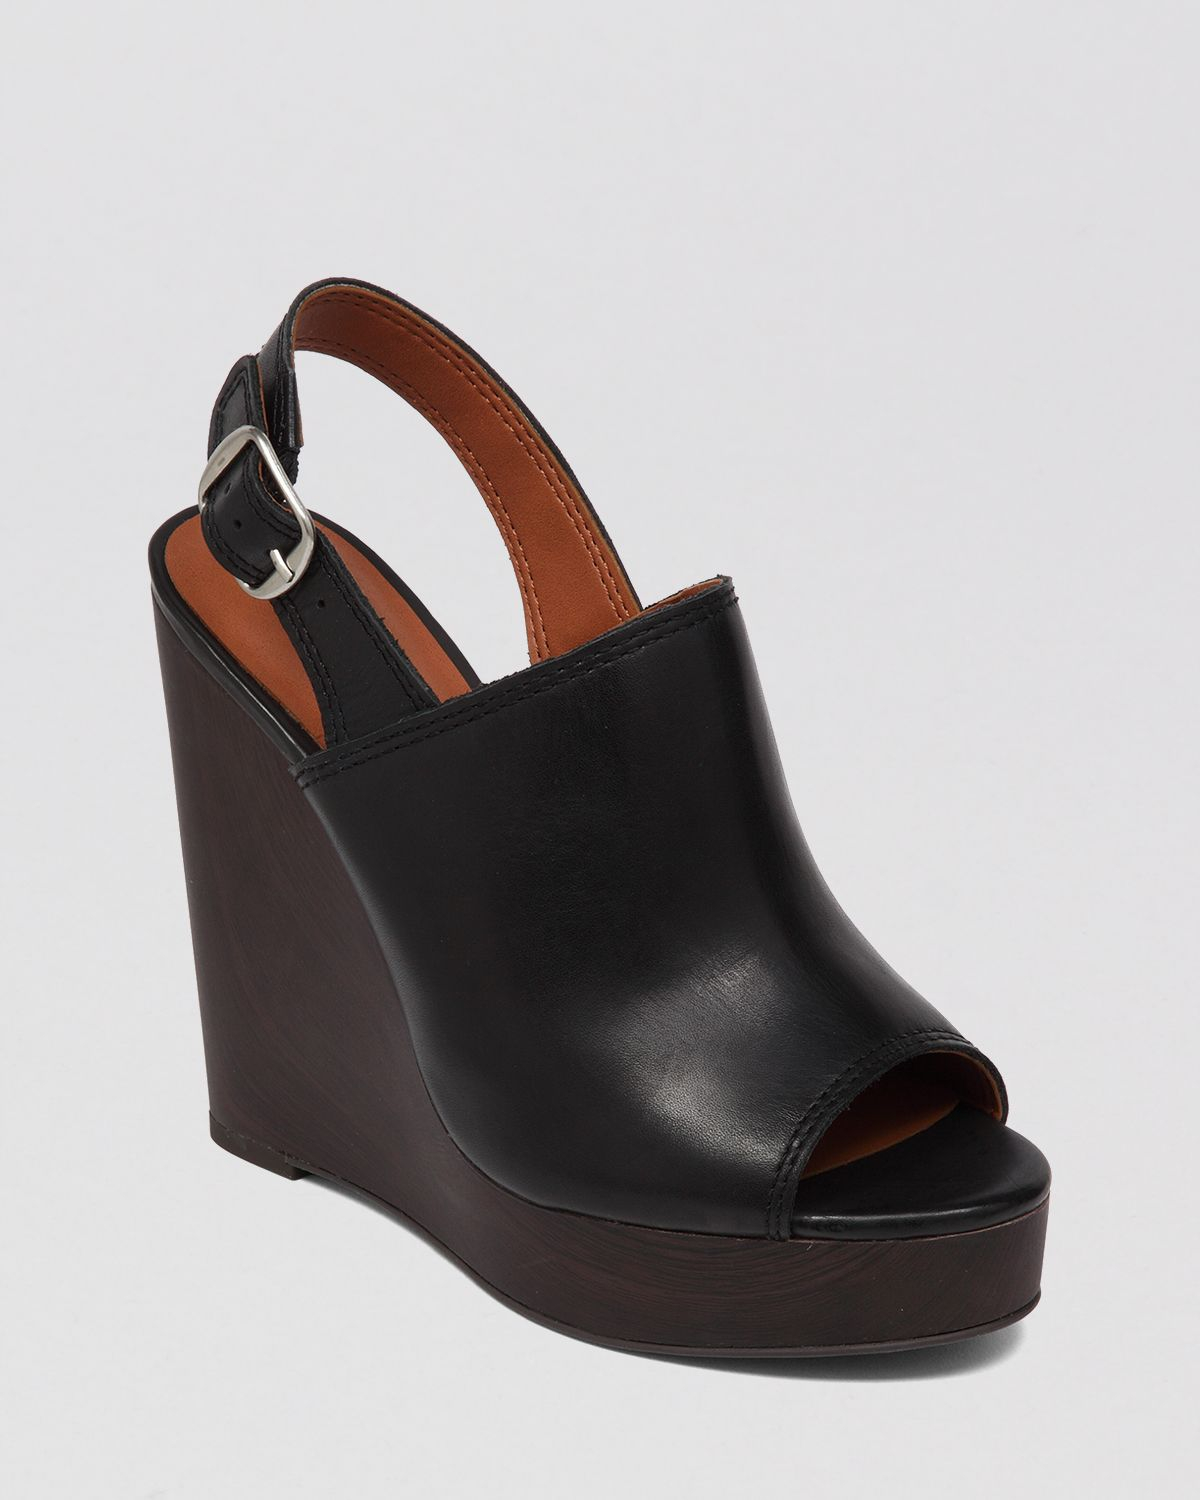 Lyst - Lucky Brand Open Toe Platform Wedge Sandals Ronand in Black